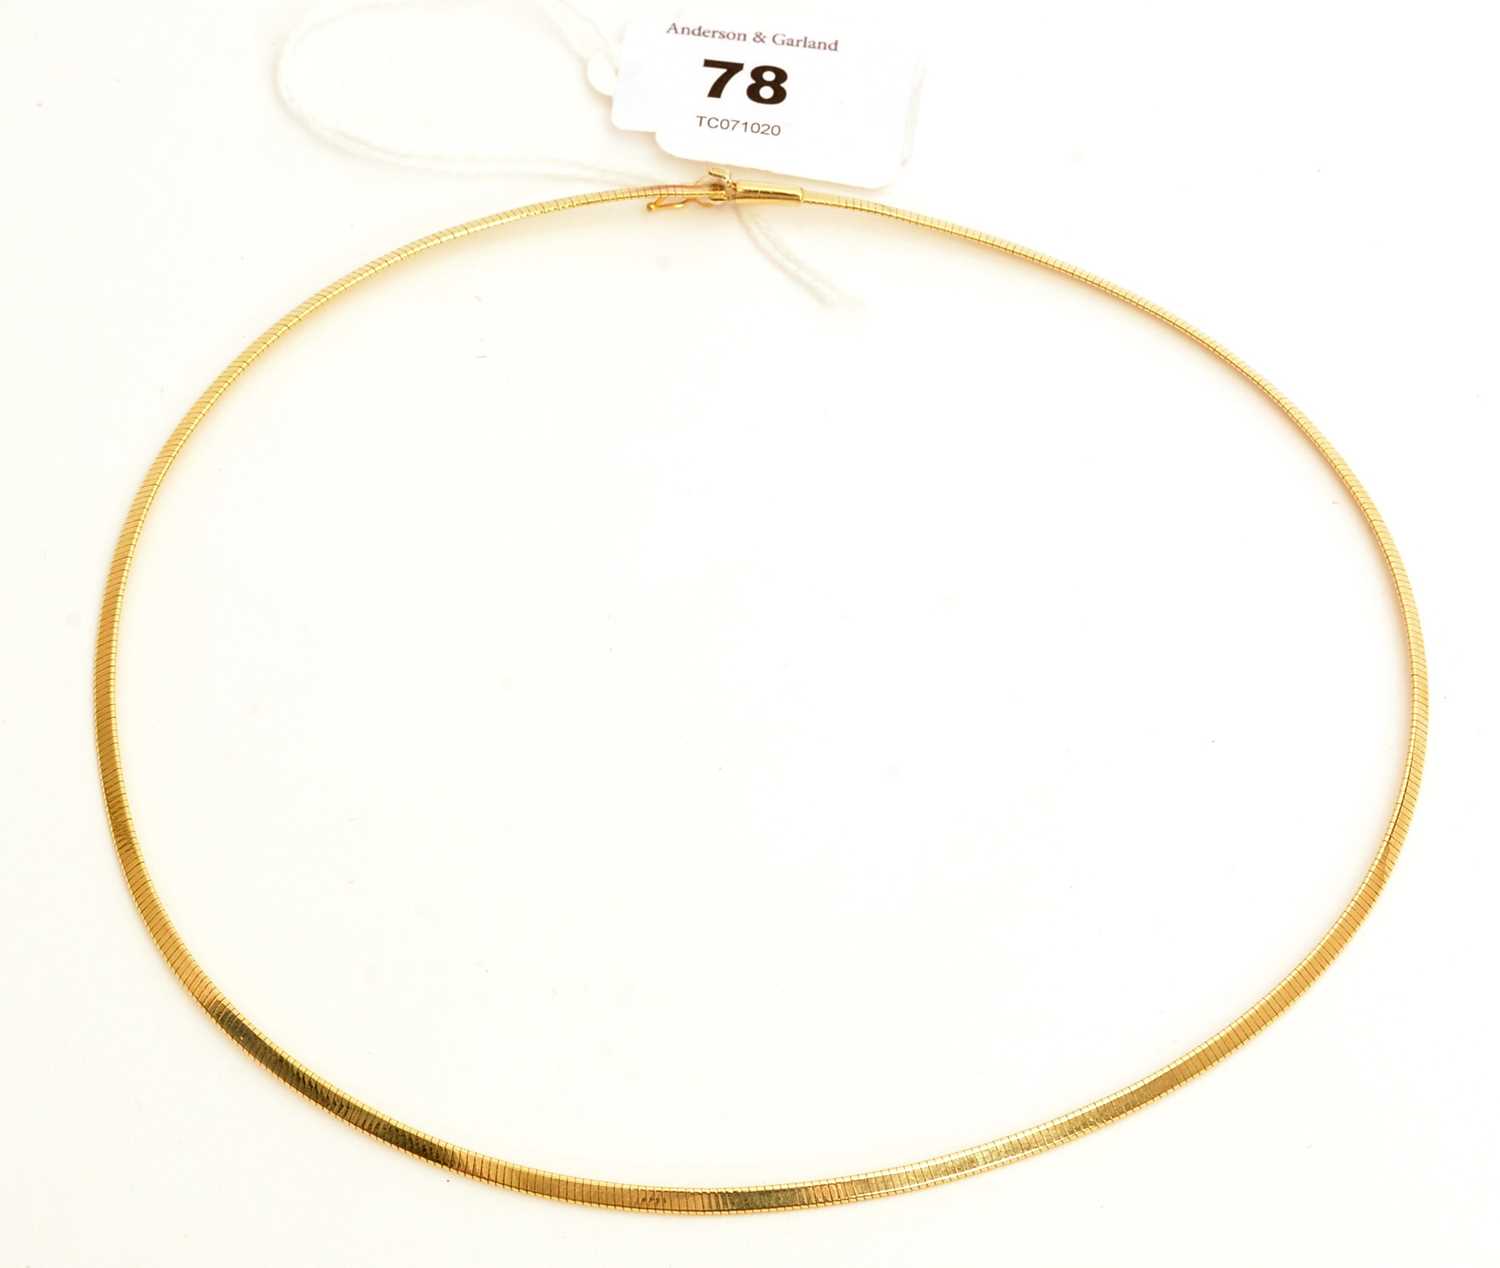 Lot 78 - 9ct yellow gold necklace